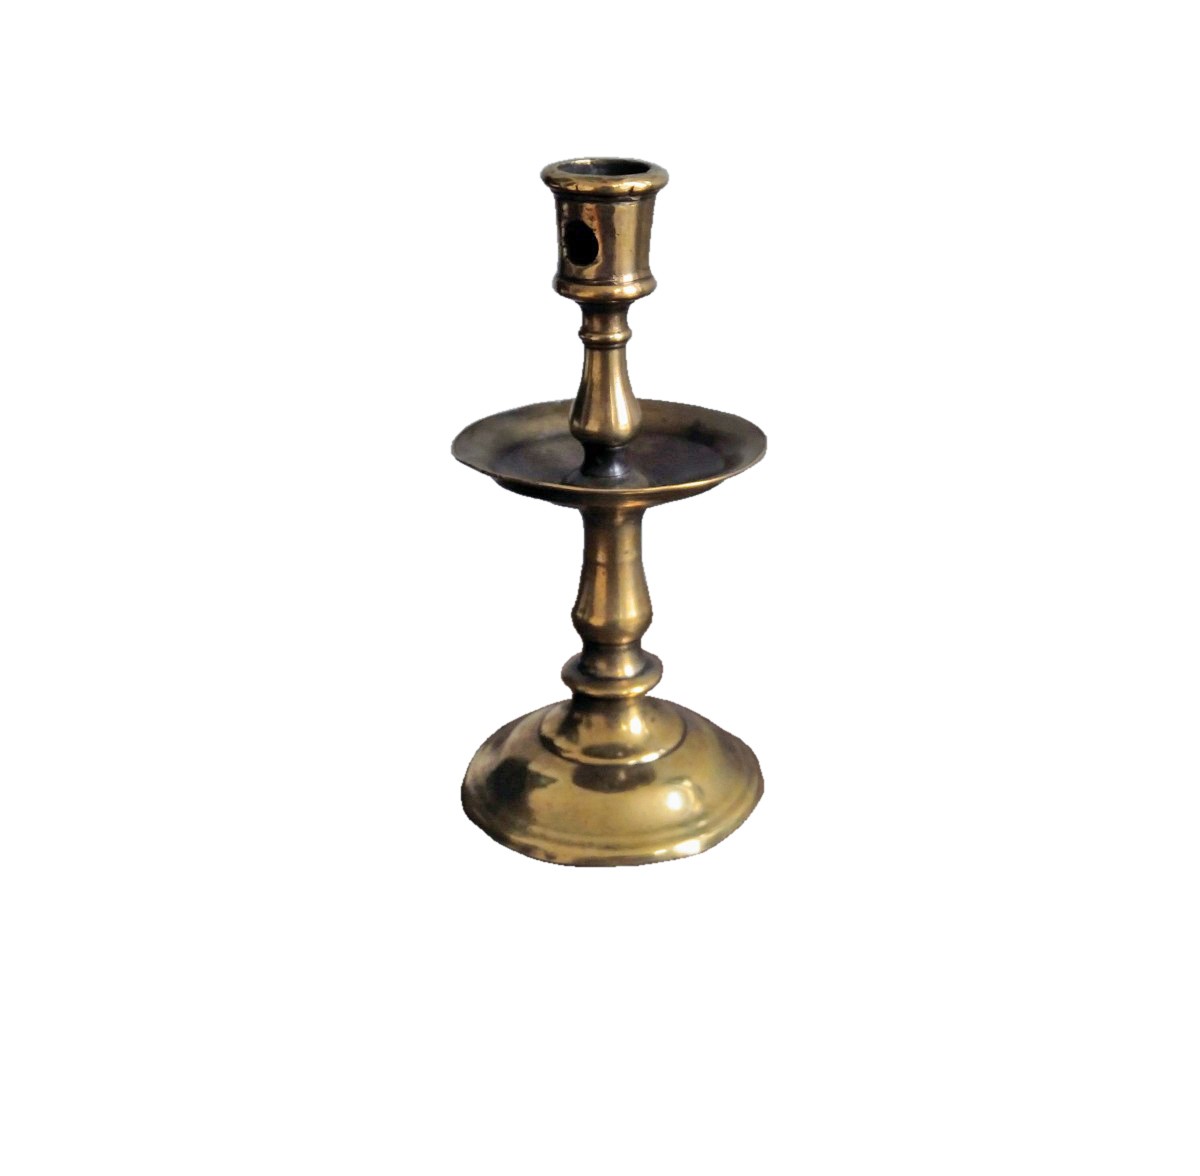 Medieval,bronze candle holder,15th century Gothic,candlestick